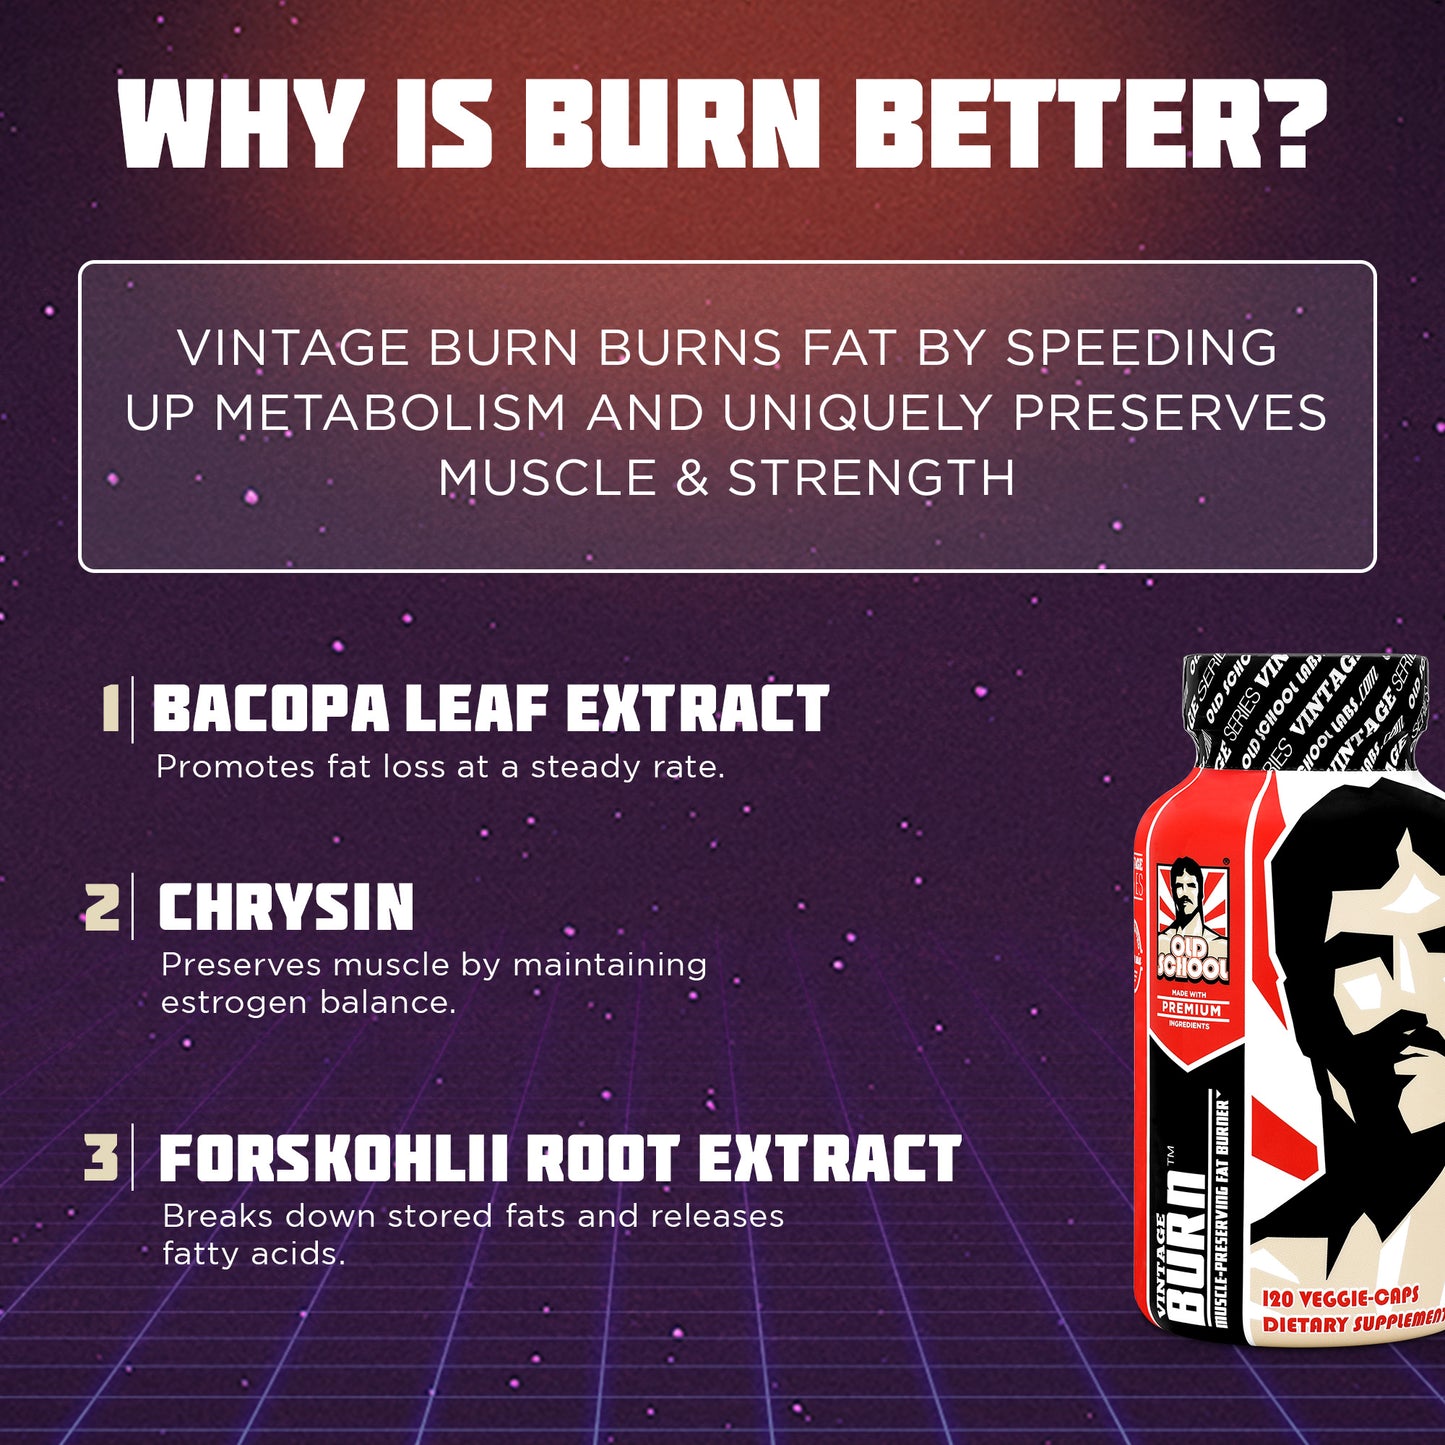 Why Vintage Burn is better